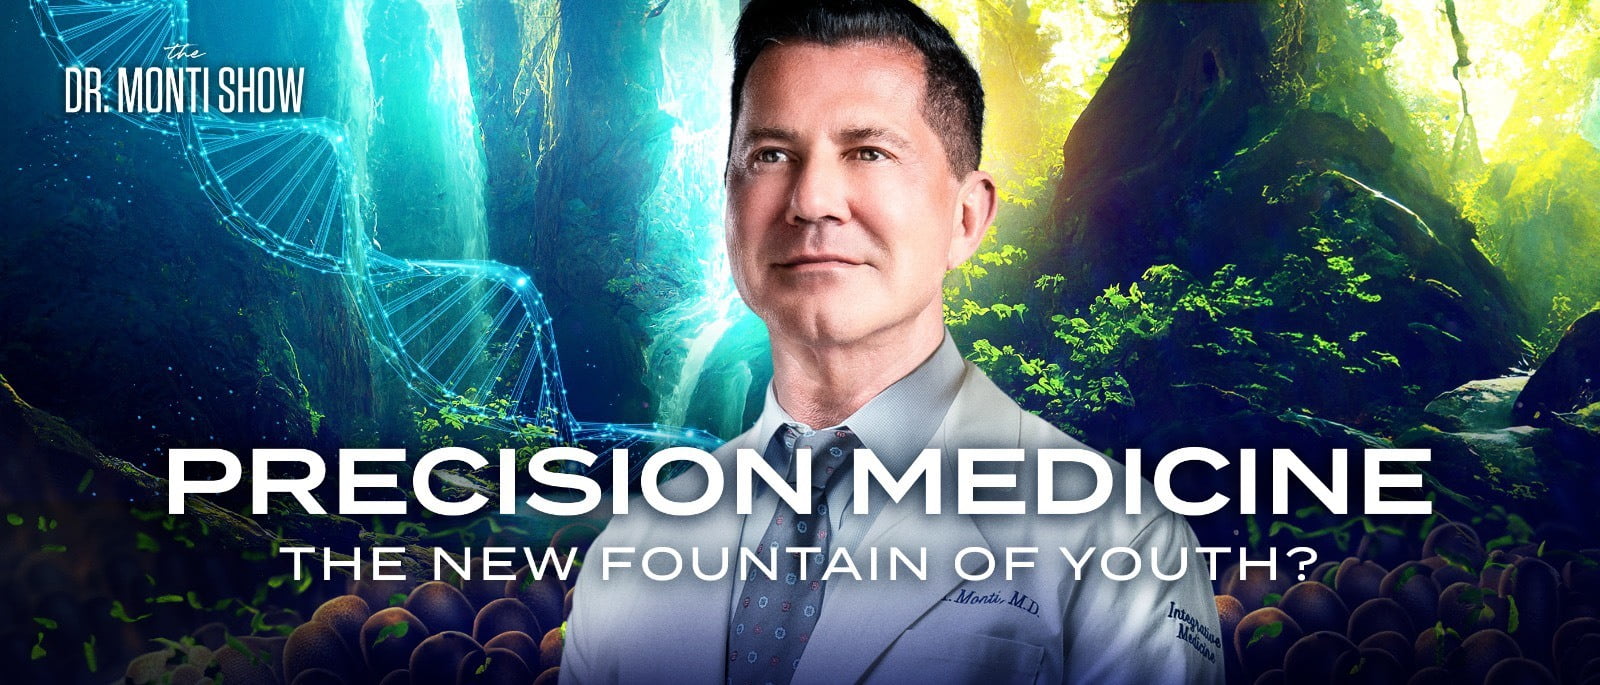 The Dr. Monti Show, titled Precision Medicine: The New Fountain of Youth? with Dr. Dan Monti looking into the distance